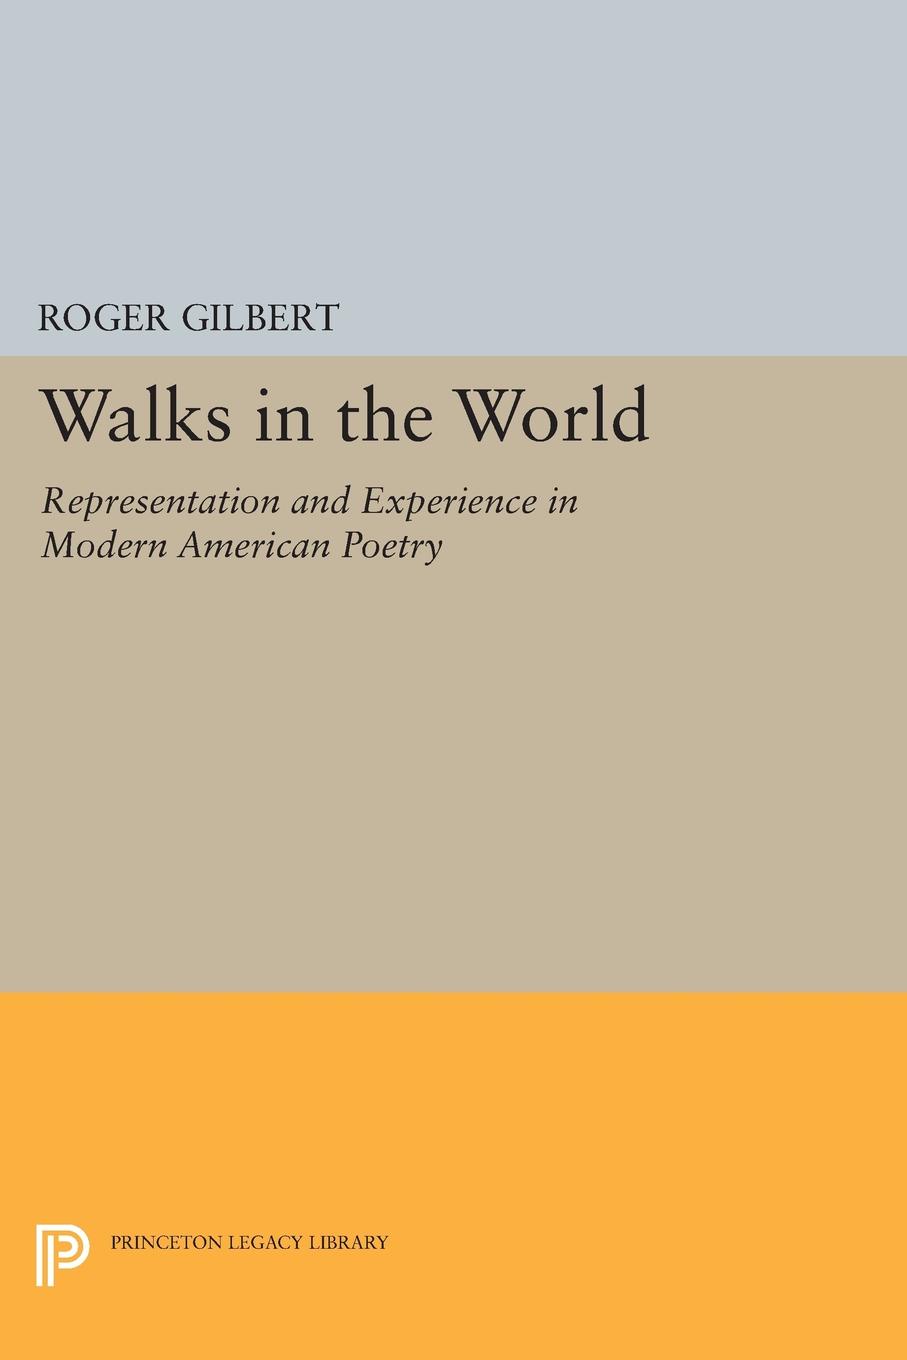 Walks in the World. Representation and Experience in Modern American Poetry